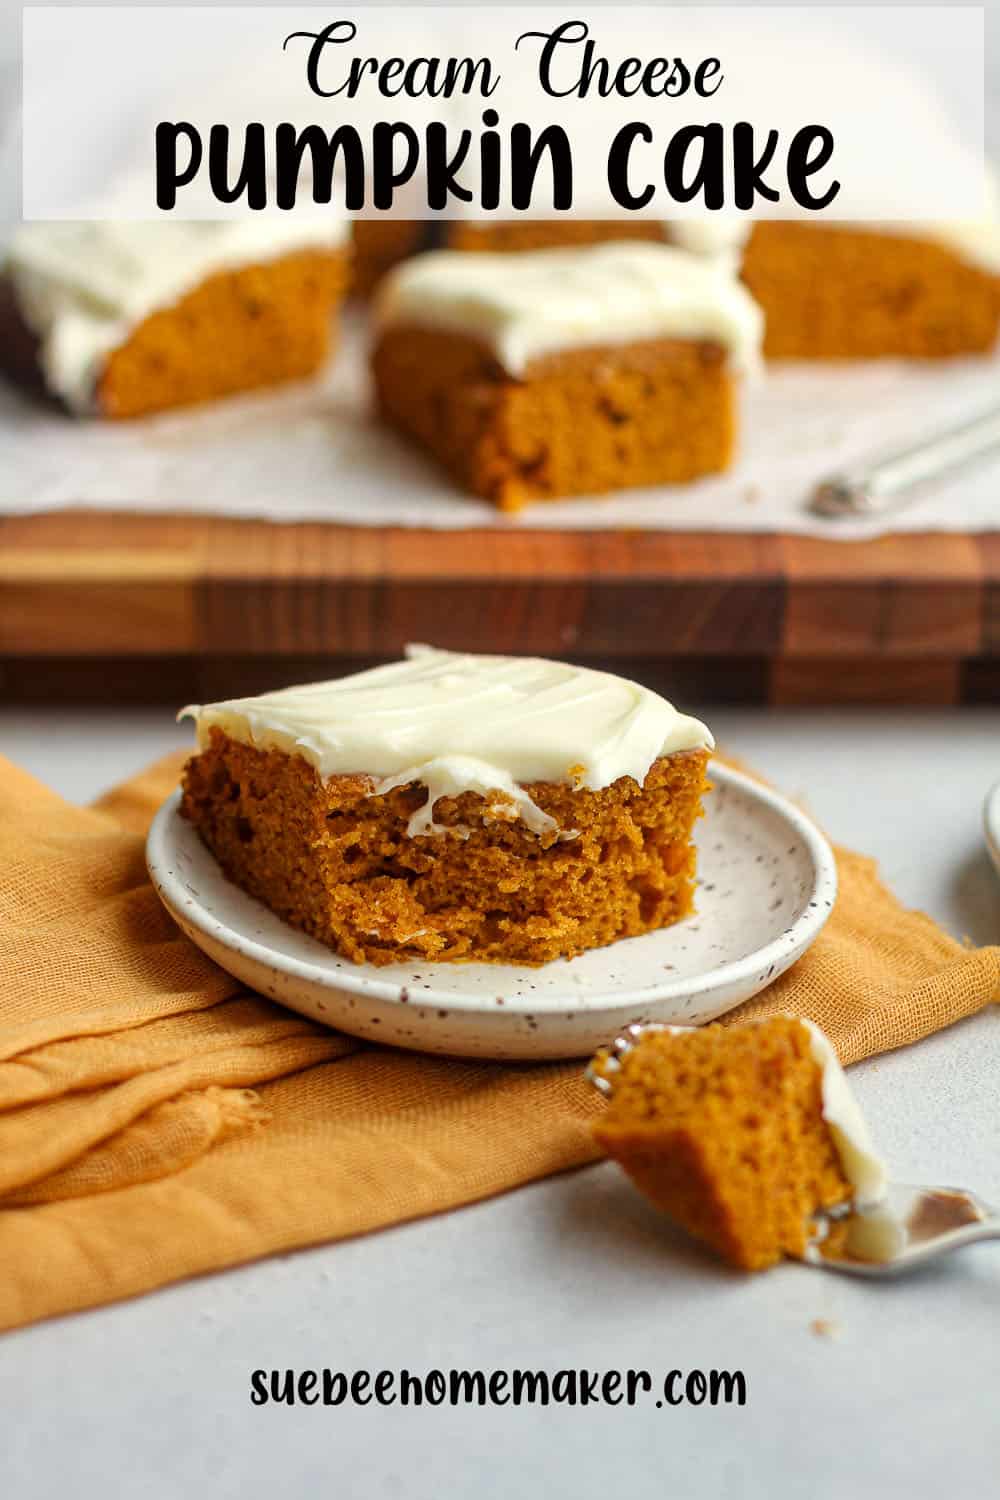 Side view of a slice of pumpkin cake with a bite out.